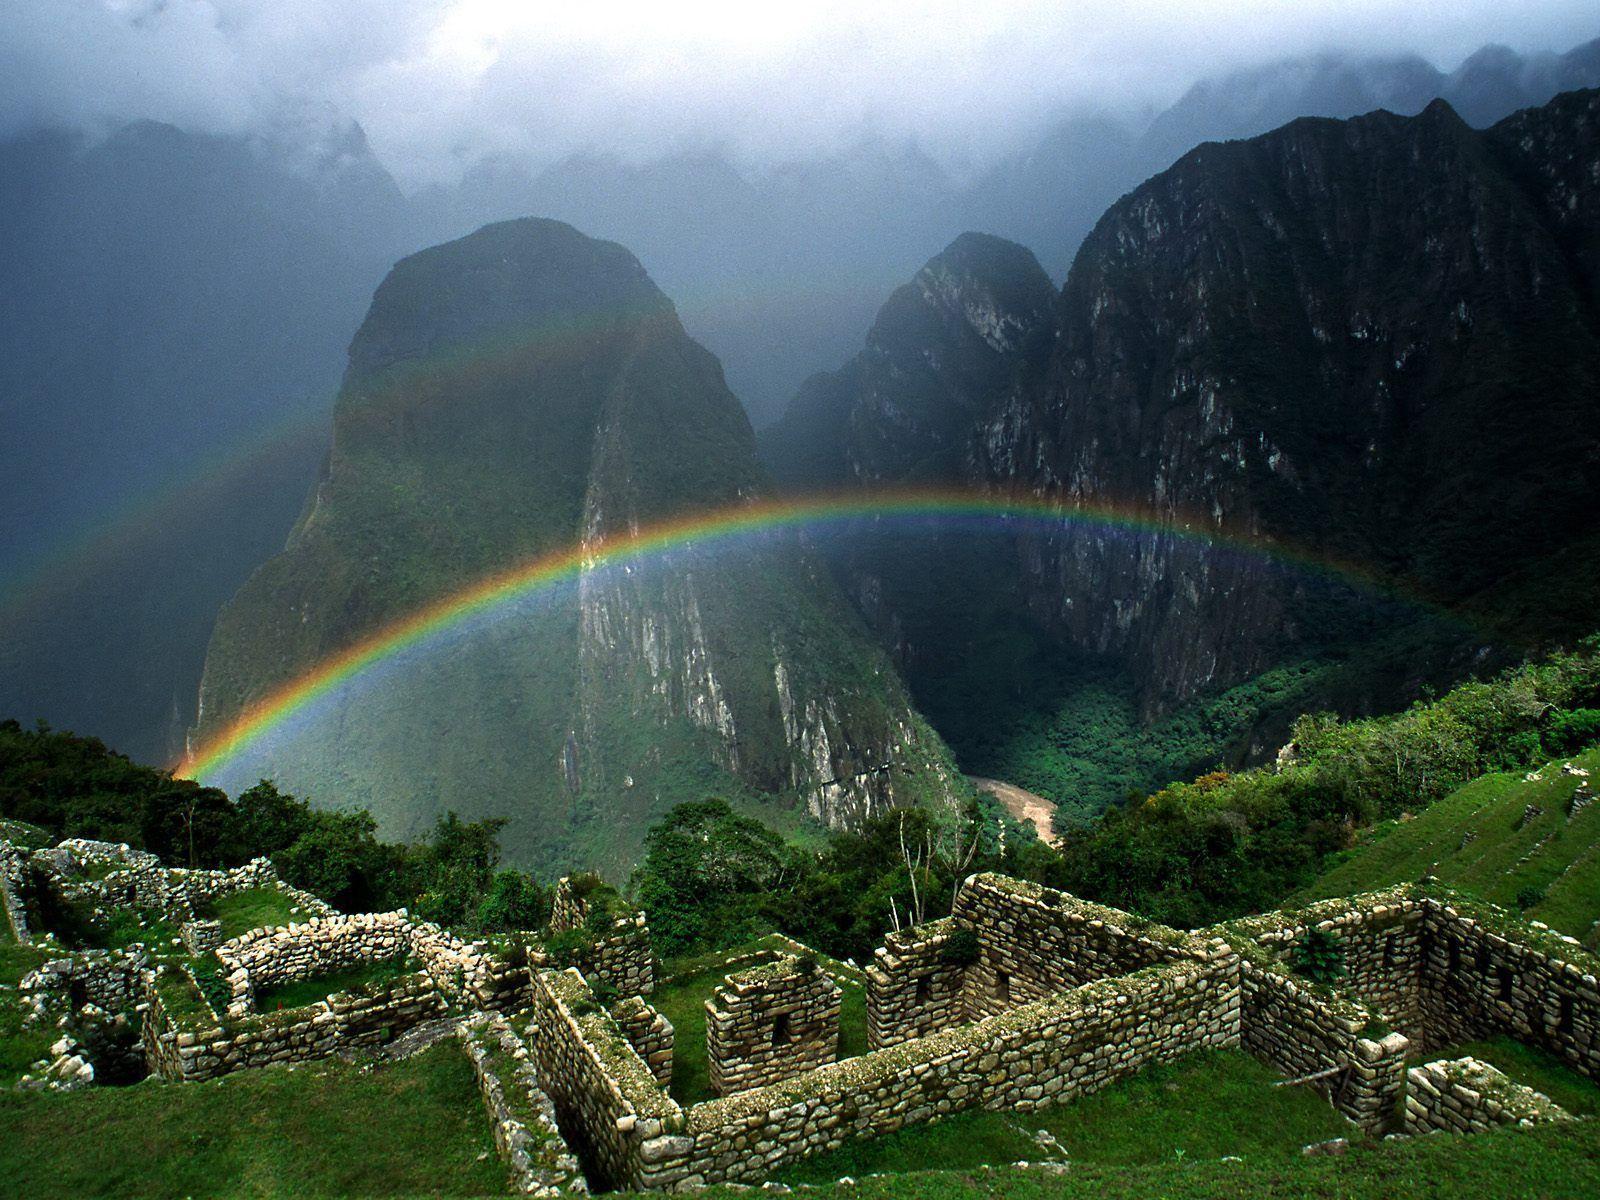 Rainbow in mountains of Panama wallpaper and image